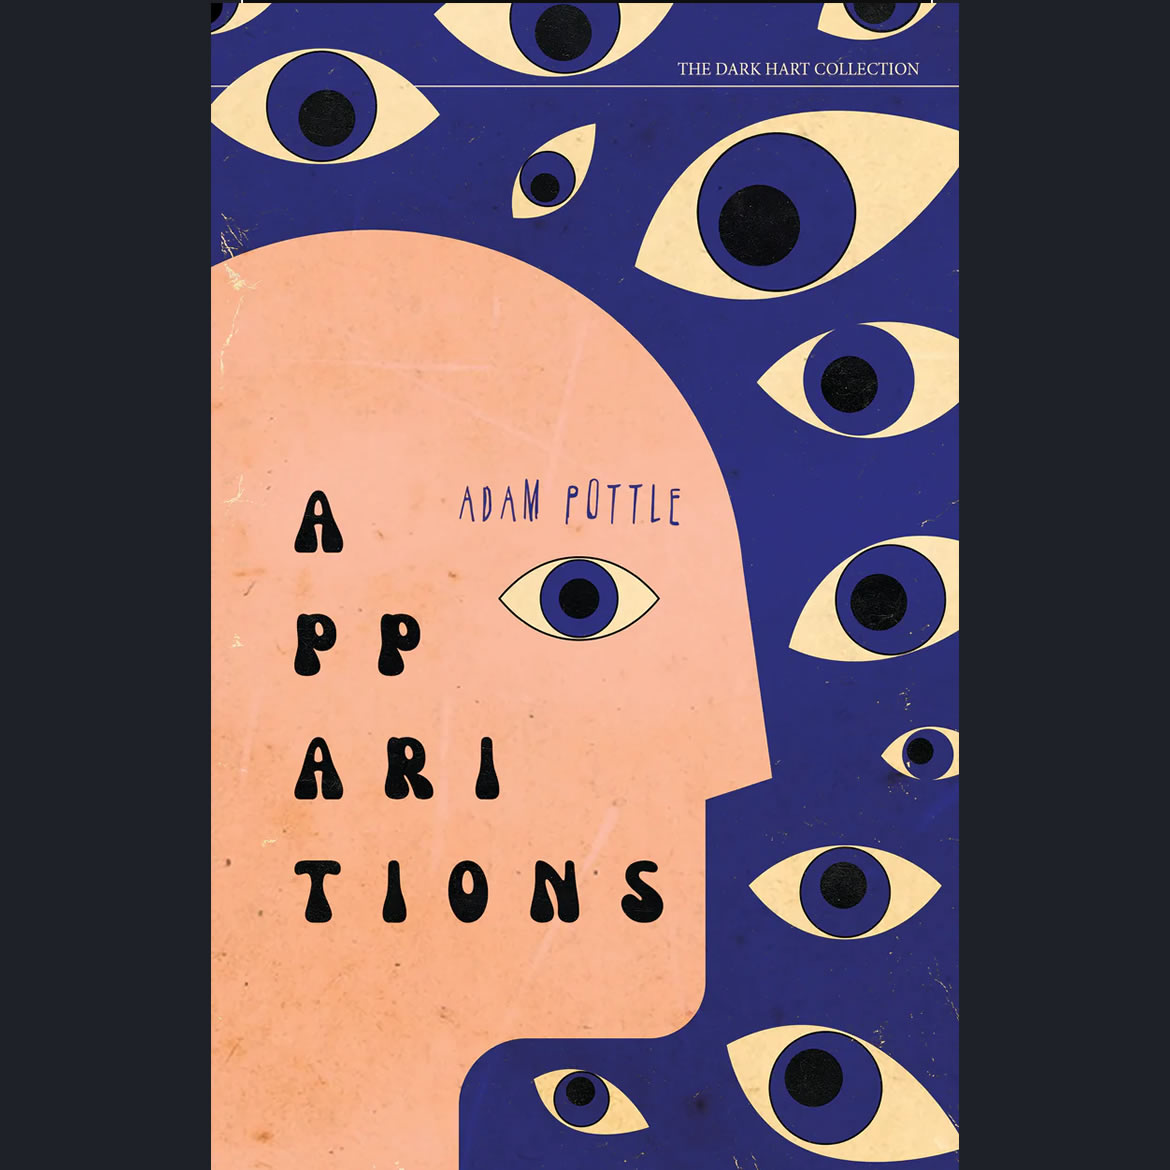 APPARITIONS by Adam Pottle